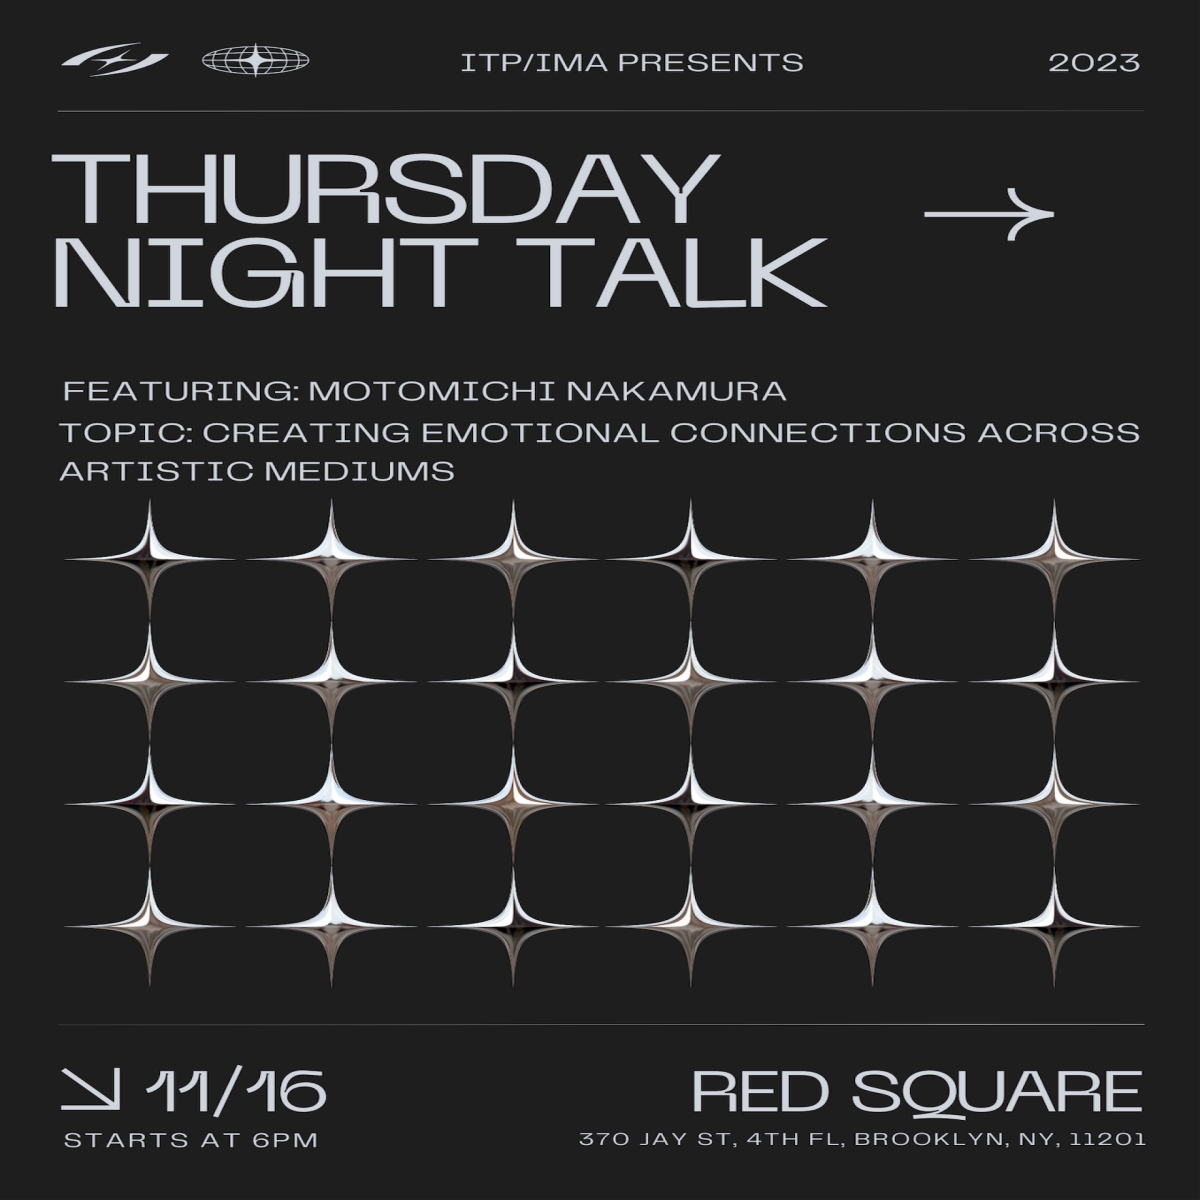 ITP/IMA Presents THursday Night Talk, featuring: Motomichi Nakamura. Topic: Creating emotional connections across artistic mediums. 11/16, starts at 6pm. Red Square - 370 Jay st, 4th fl, Brooklyn, NY, 11201